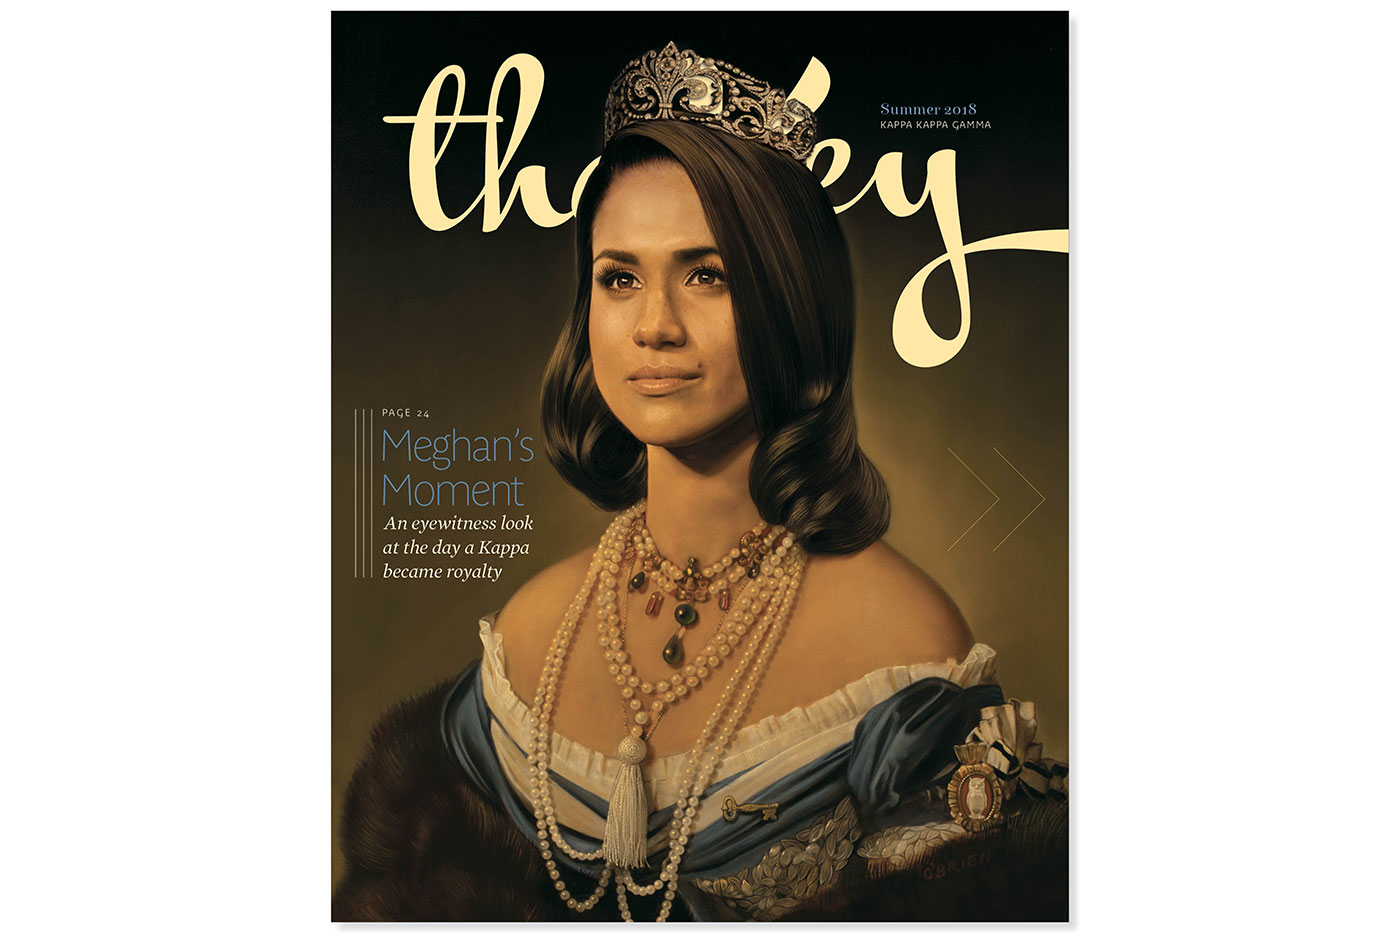 The Key Magazine with Meghan Markle The Key, Summer 2018 Illustration by Tm O’Brien